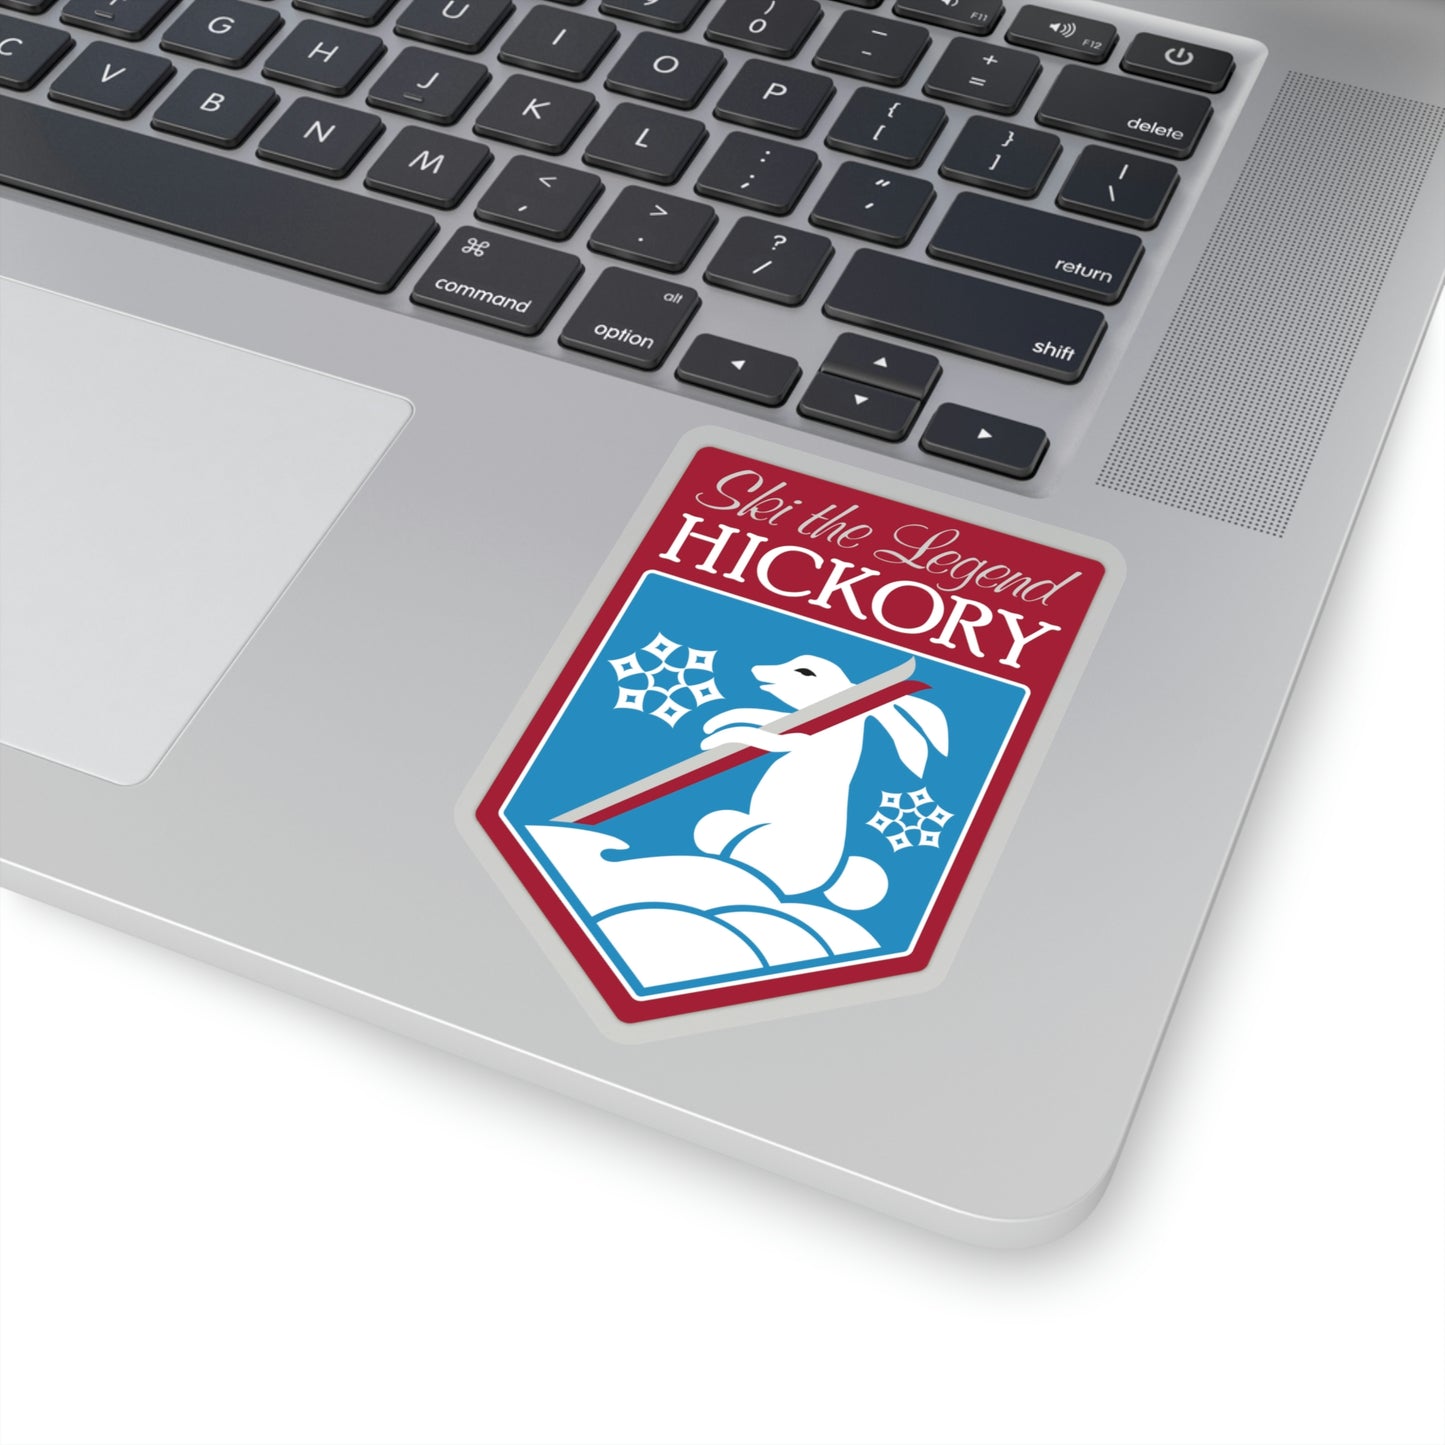 Hickory Stickers